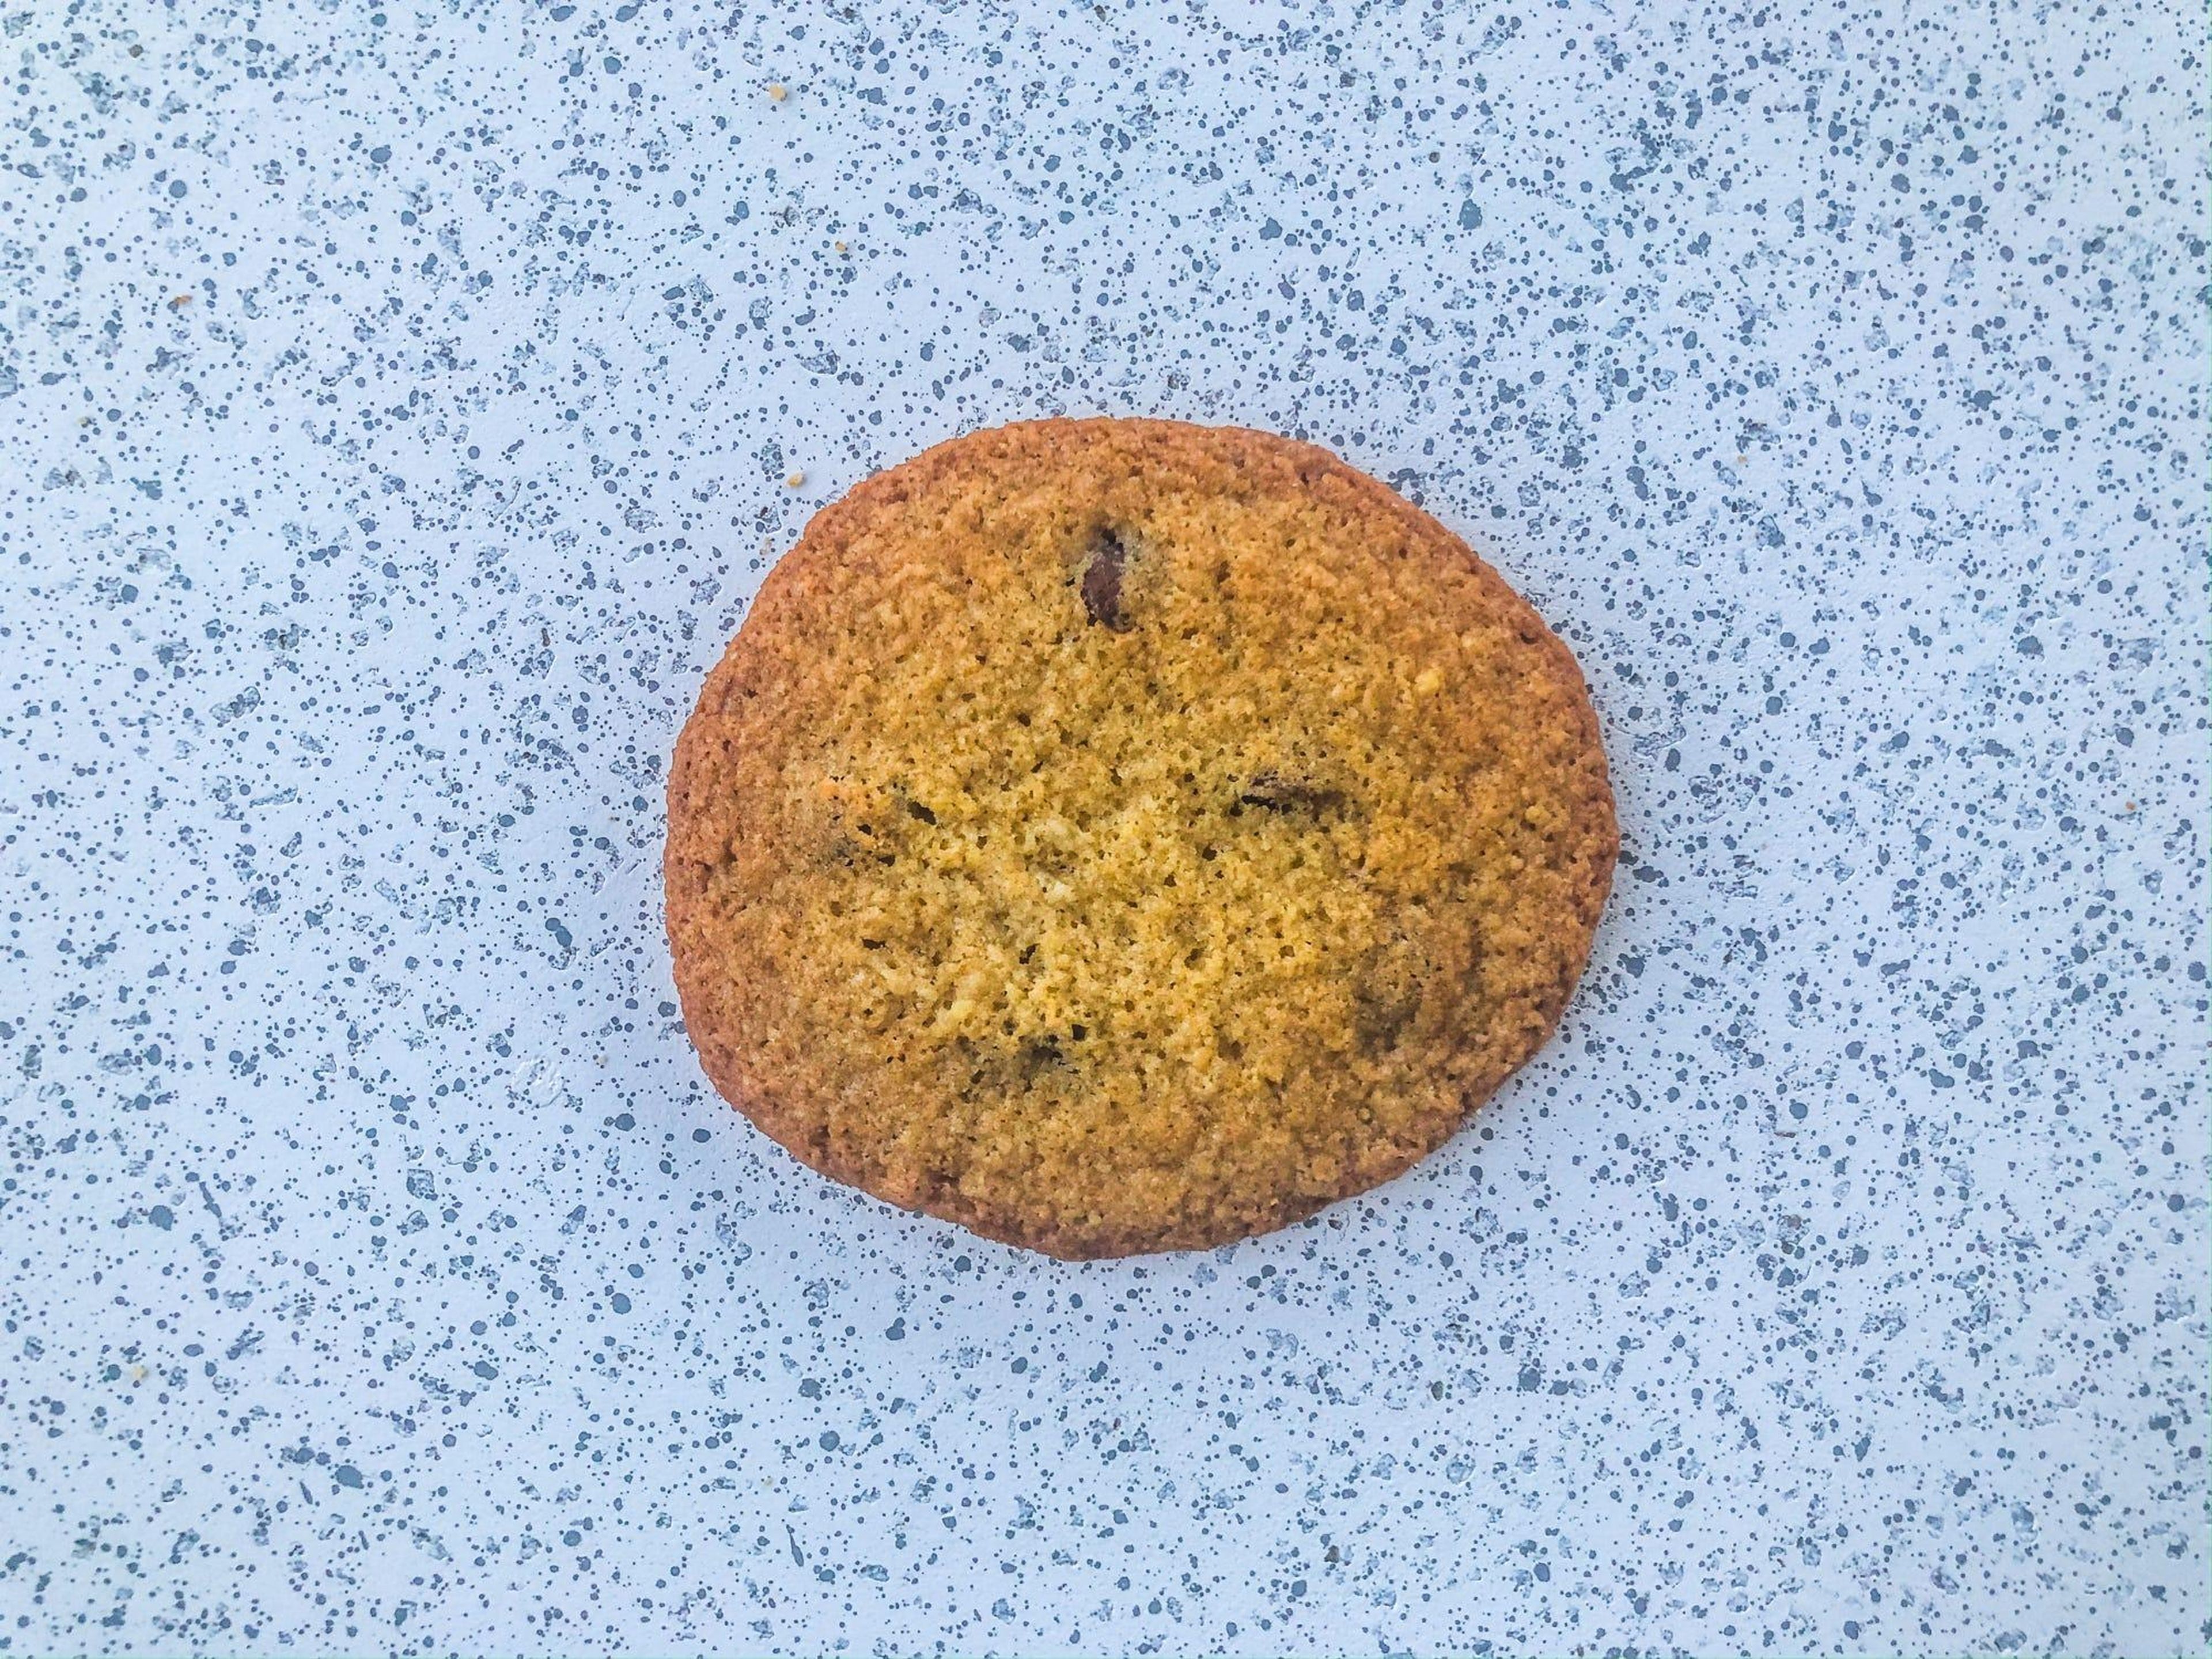 A cookie made by mixing all the ingredients at once.